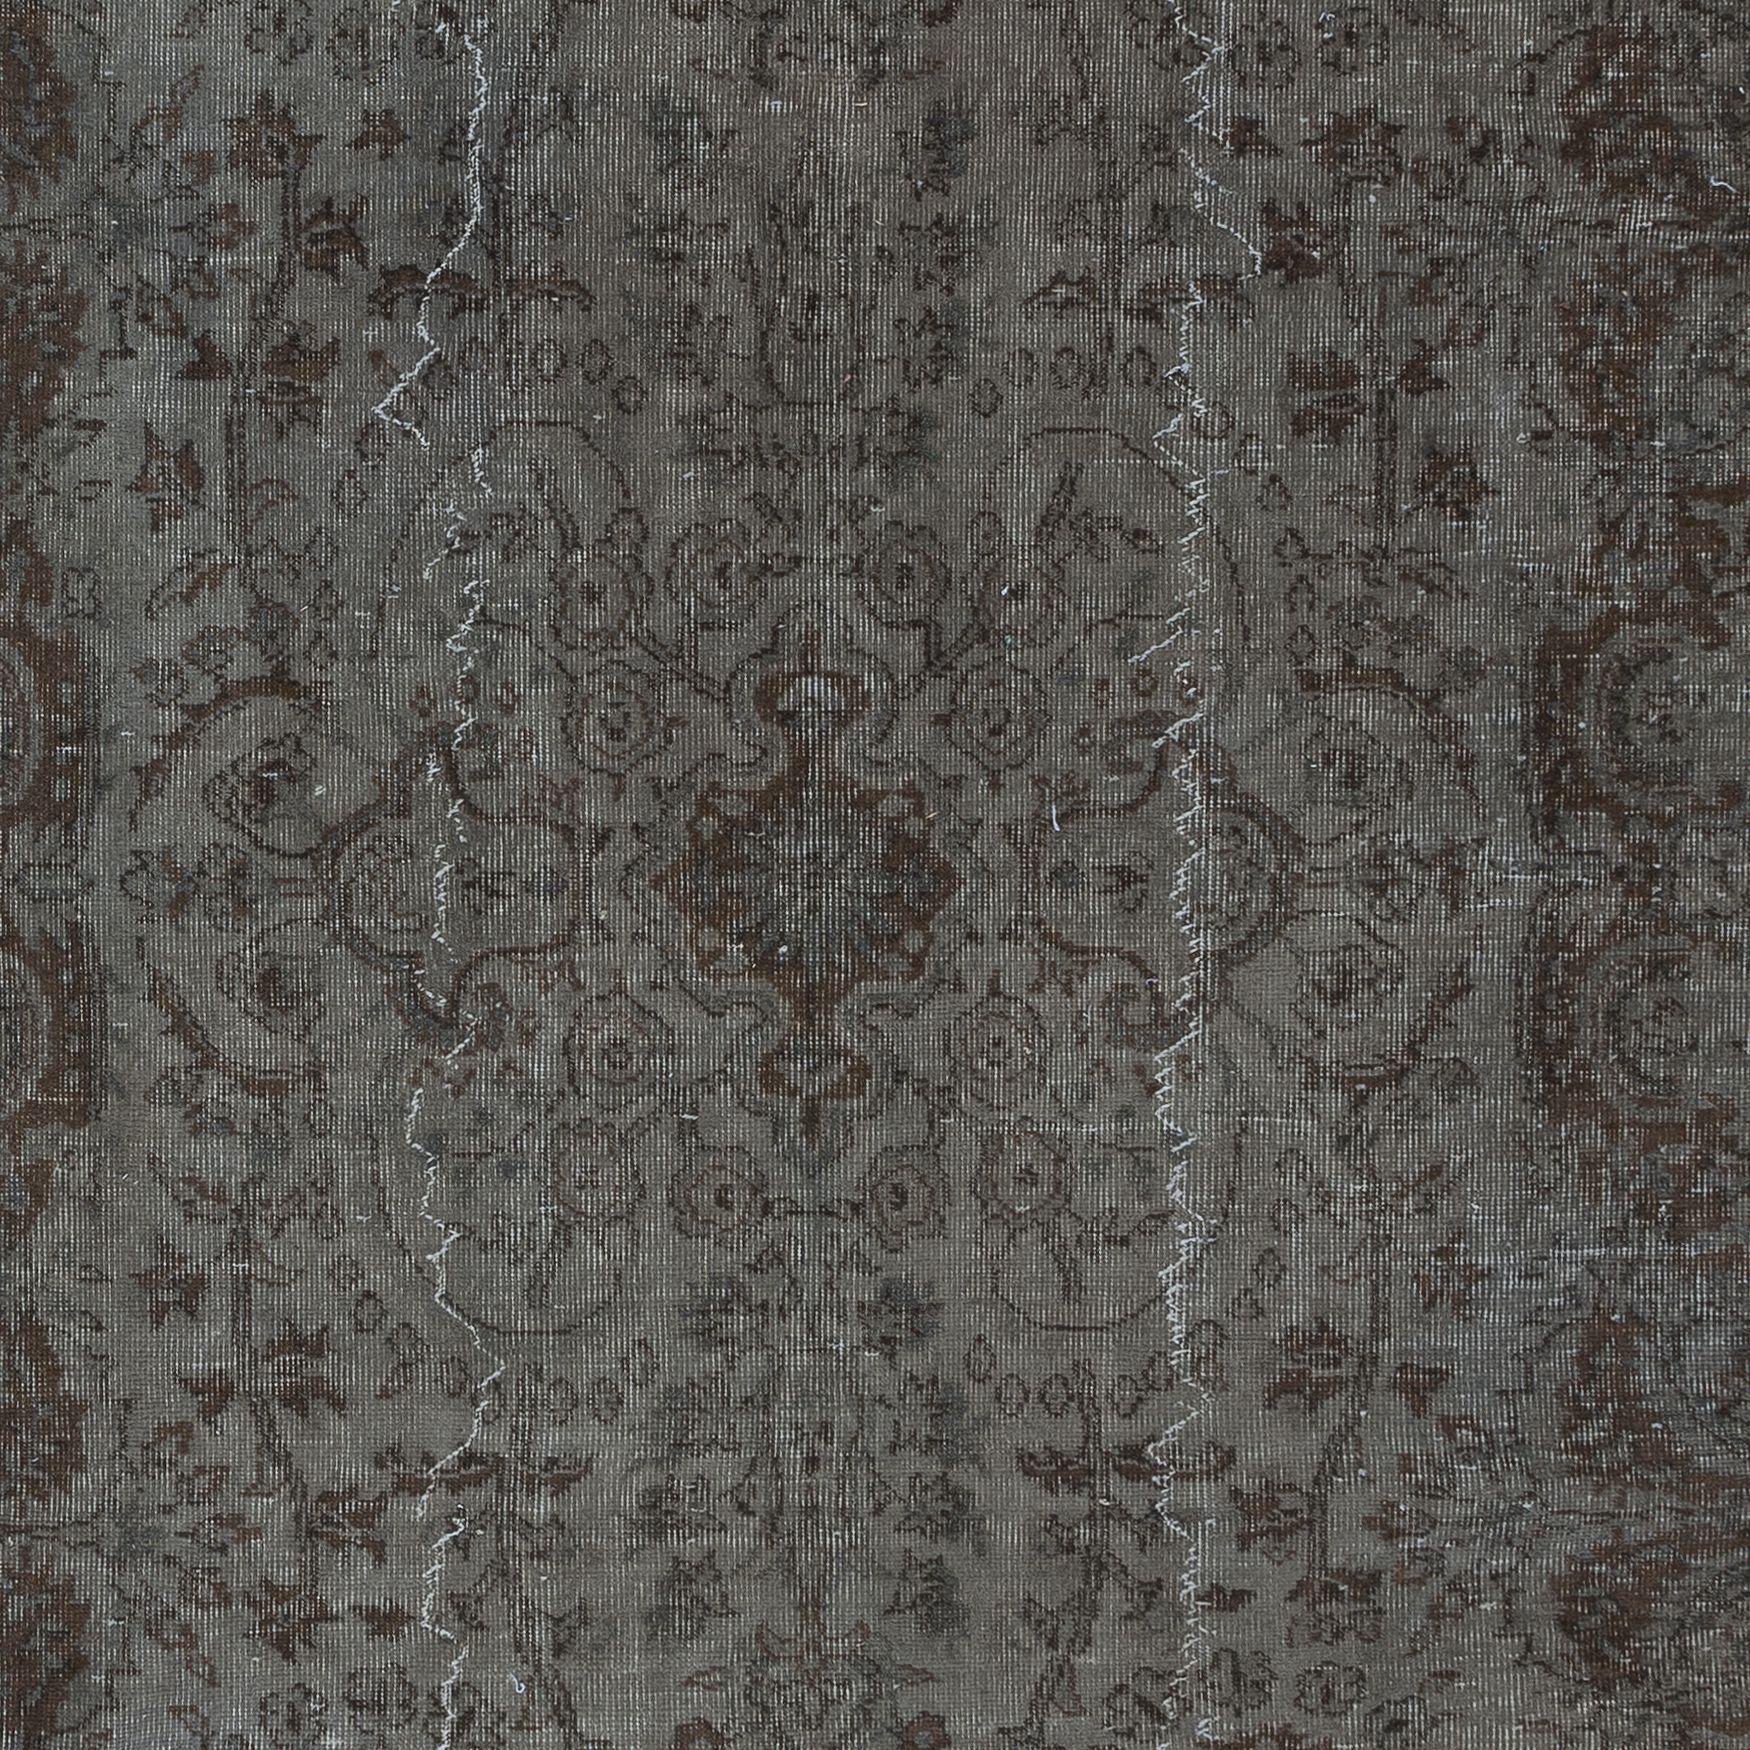 Hand-Woven 5.7x8.7 Ft Rustic Handmade Turkish Sparta Area Rug. Gray & Brown Colors For Sale